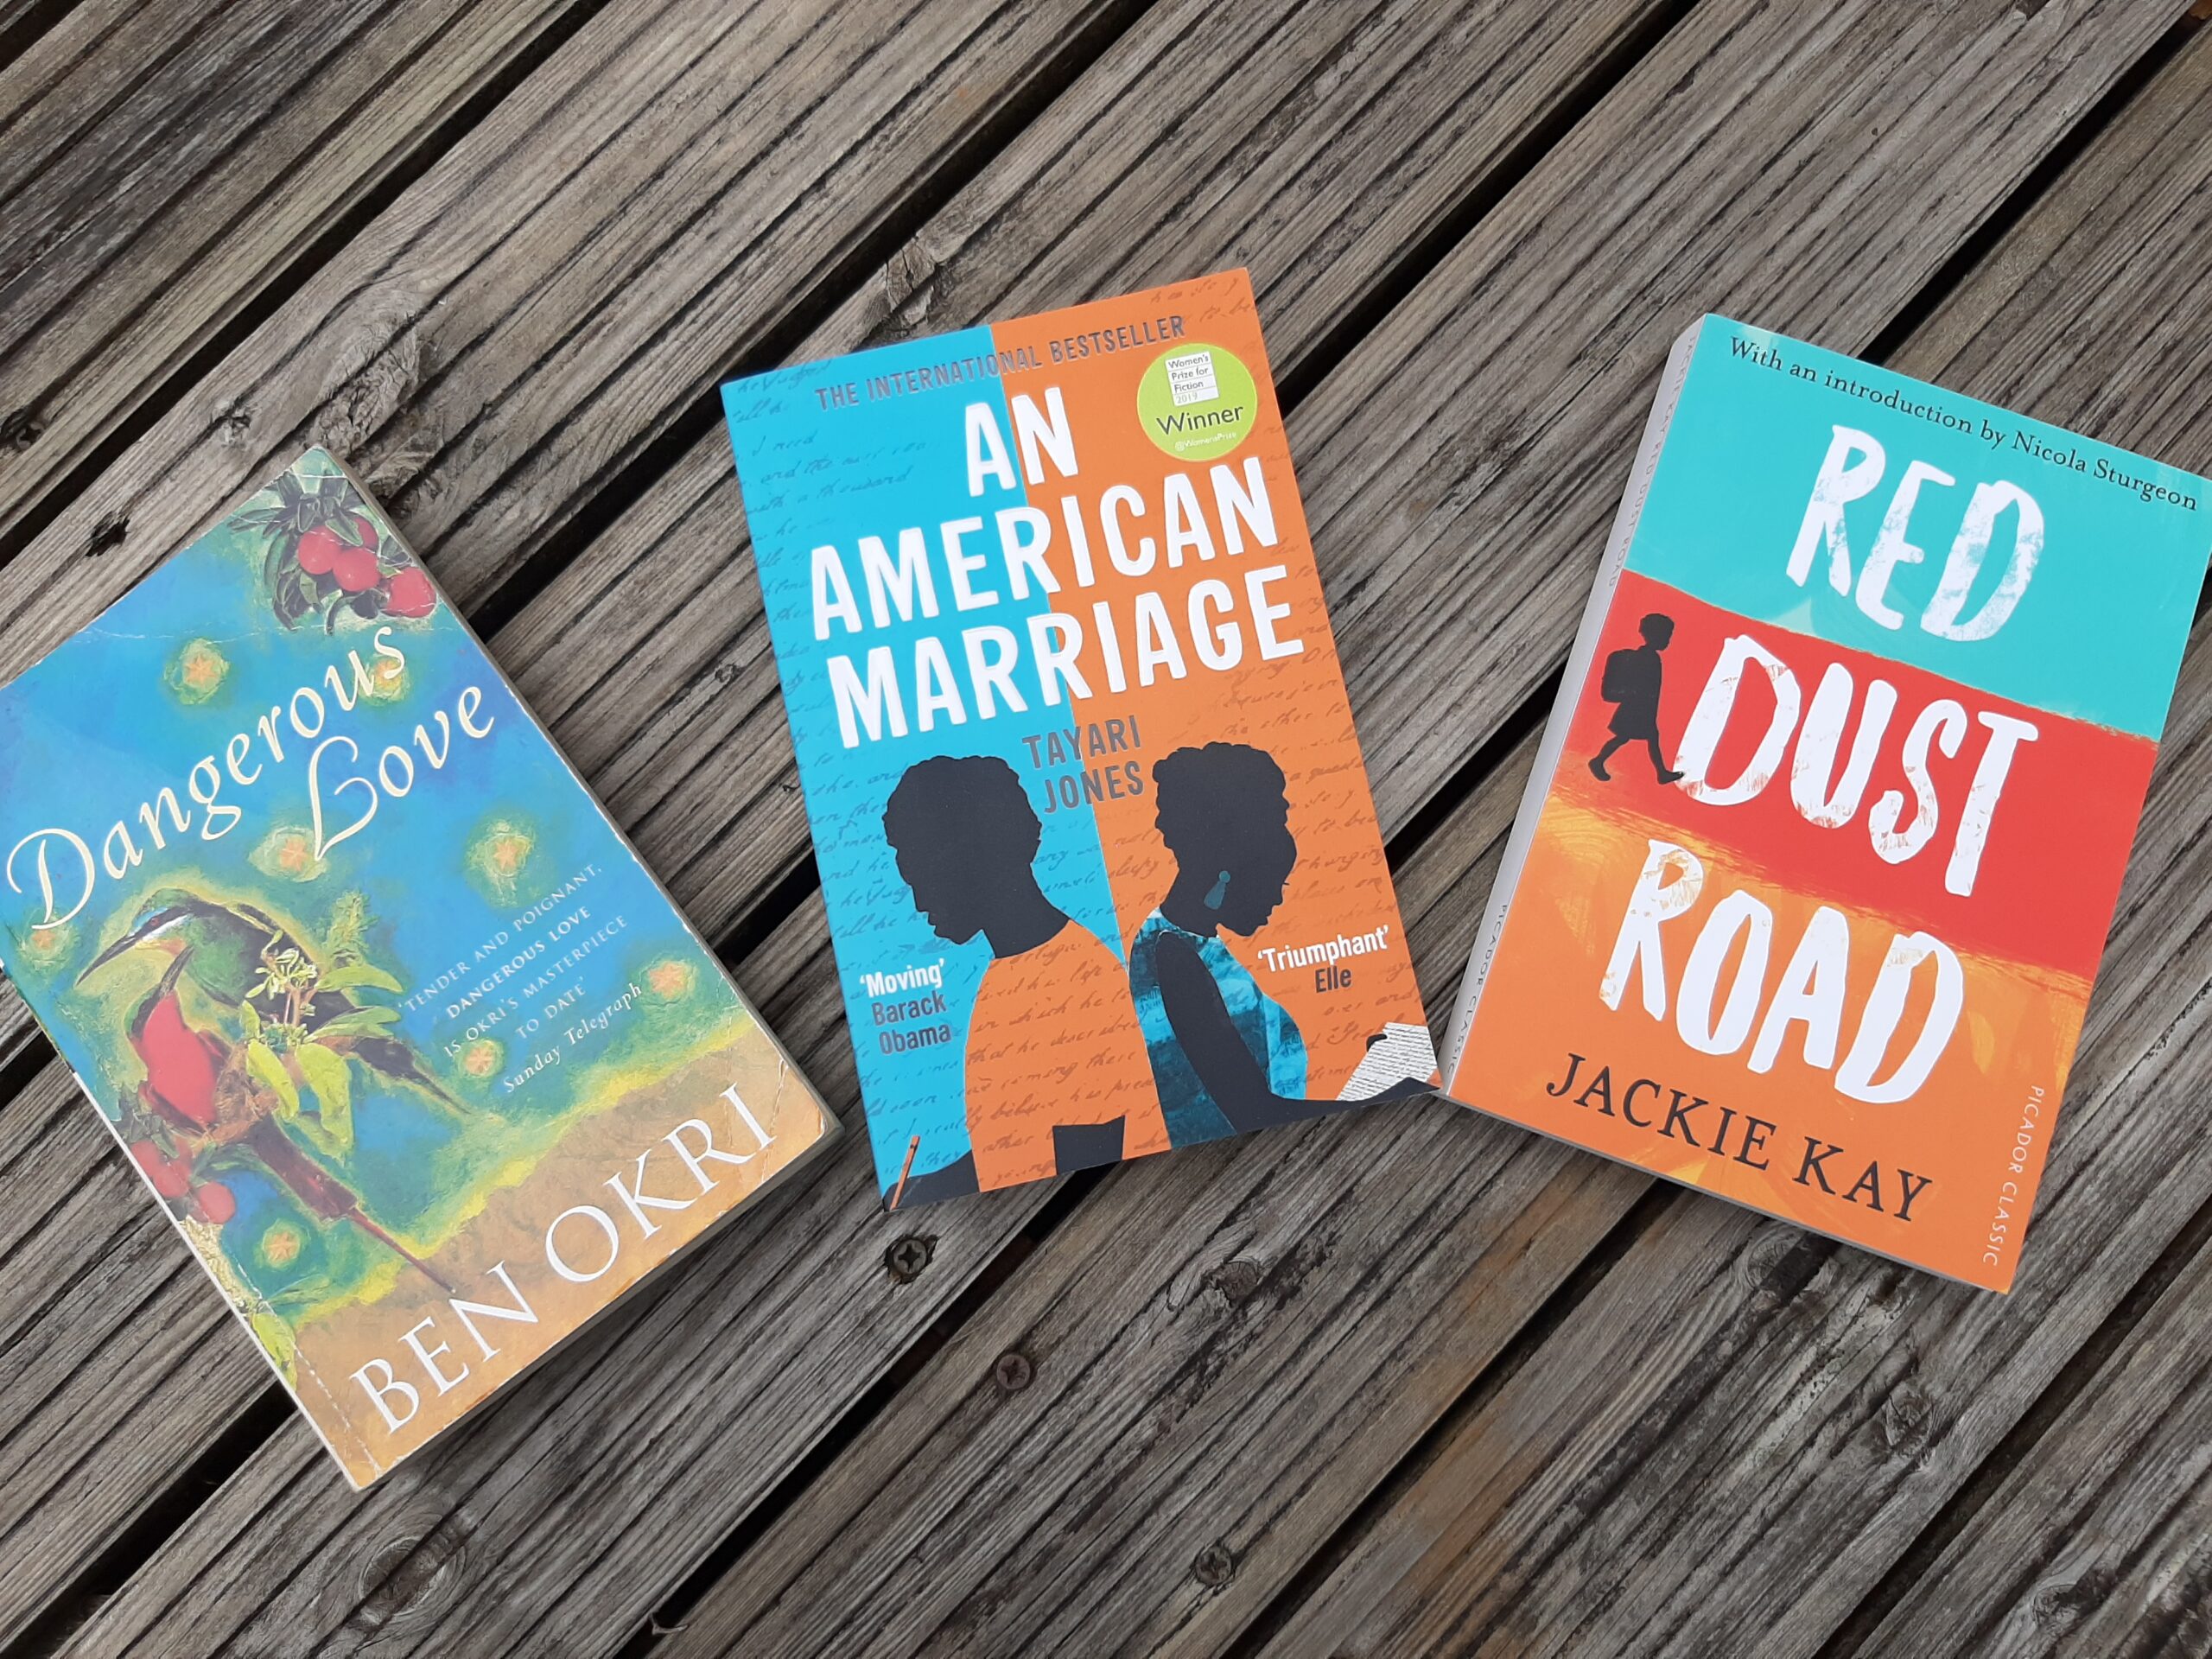 3 novels, Dangerous Love, An American Marriage and Red Dust Road